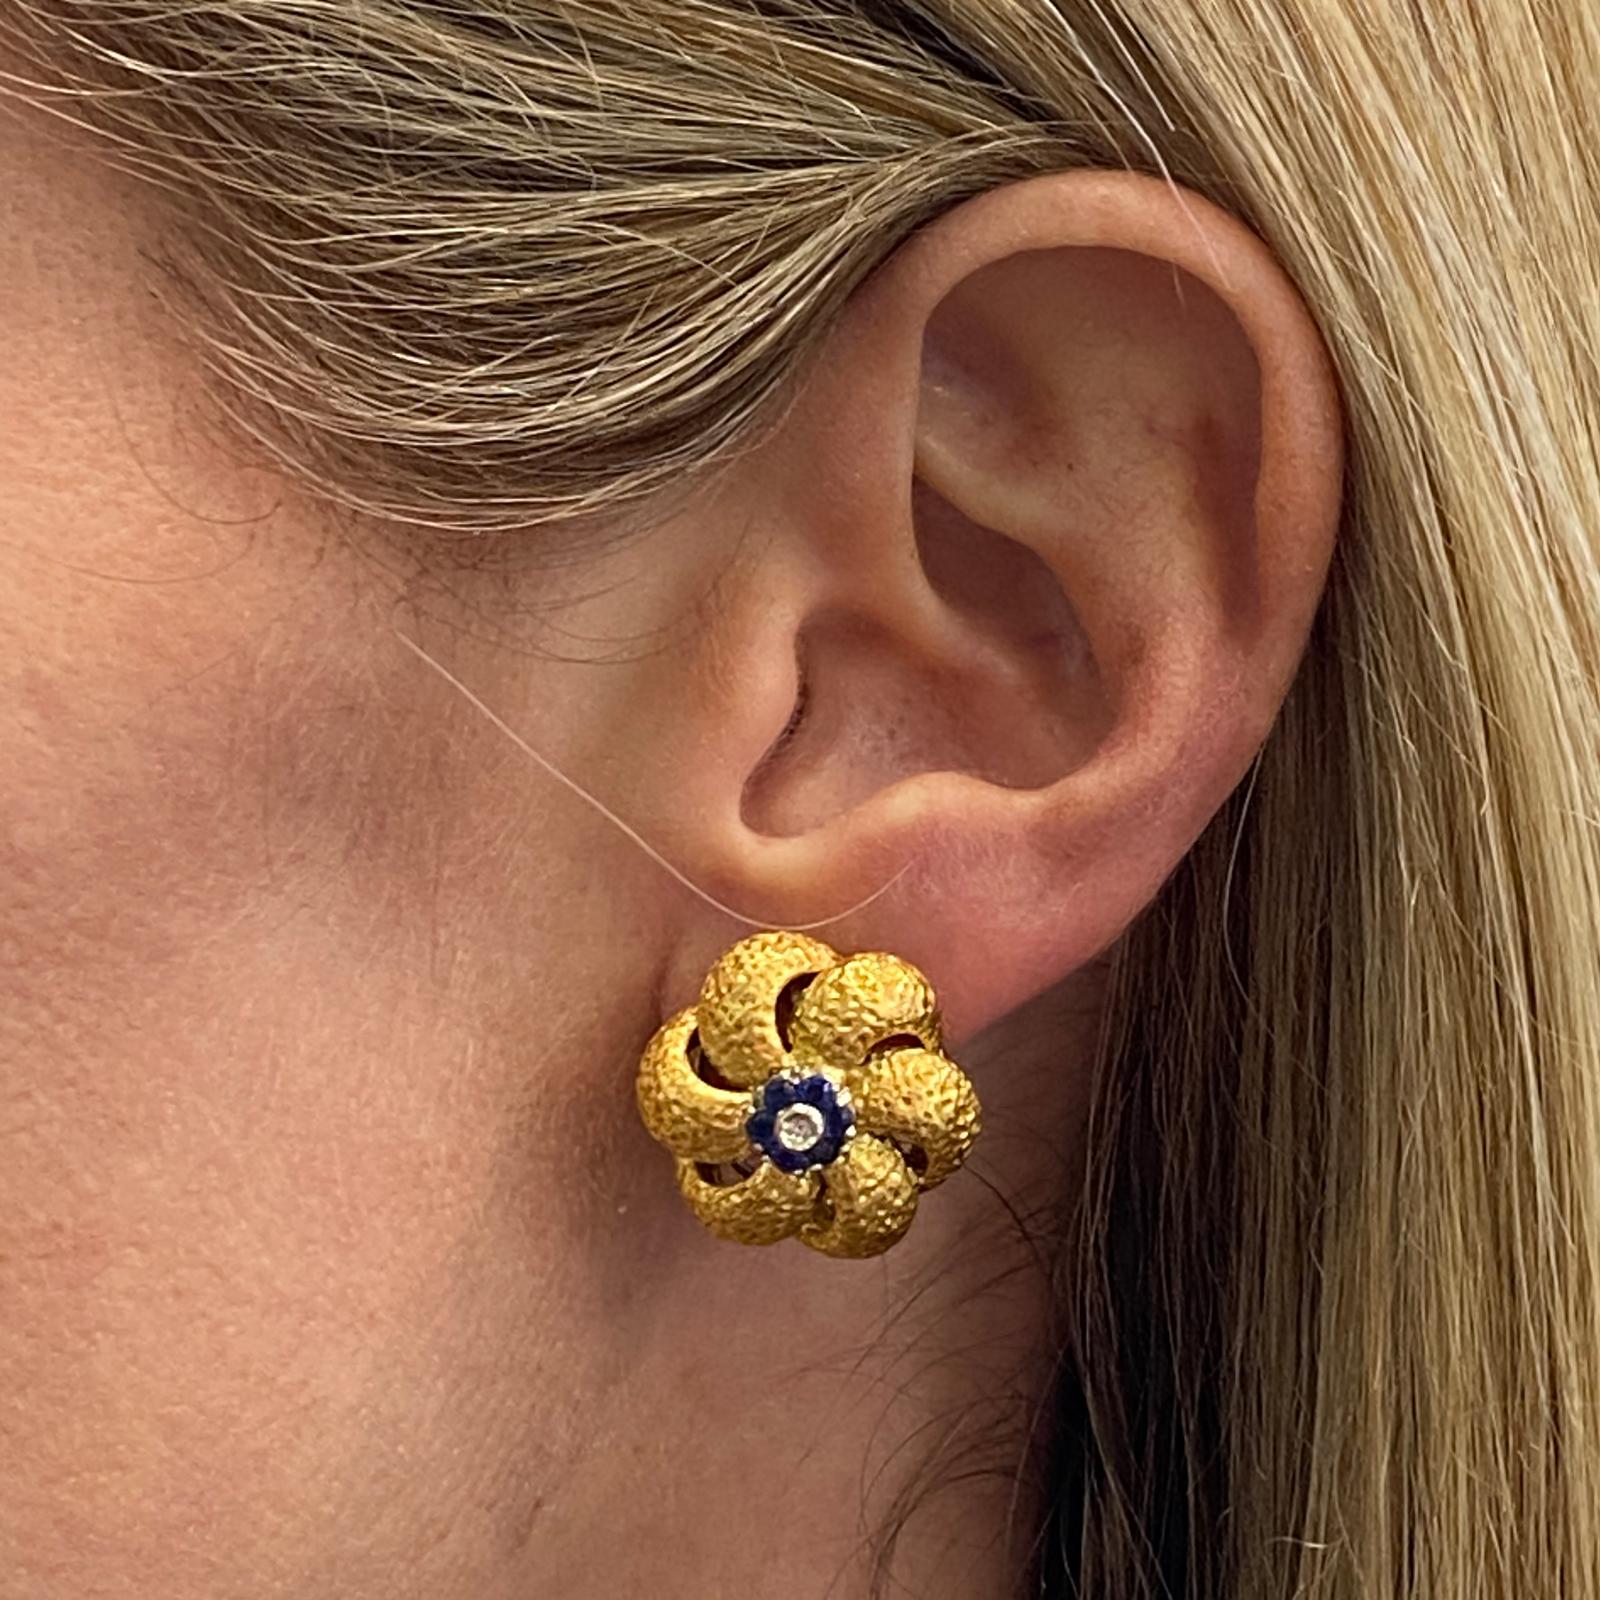 Diamond and sapphire floral earrings fashioned in textured 18 karat yellow gold. The earrings feature 2 diamonds and 12 round blue sapphire accents. The earrings measure 20mm in diameter, and clip backs (posts can be added).
